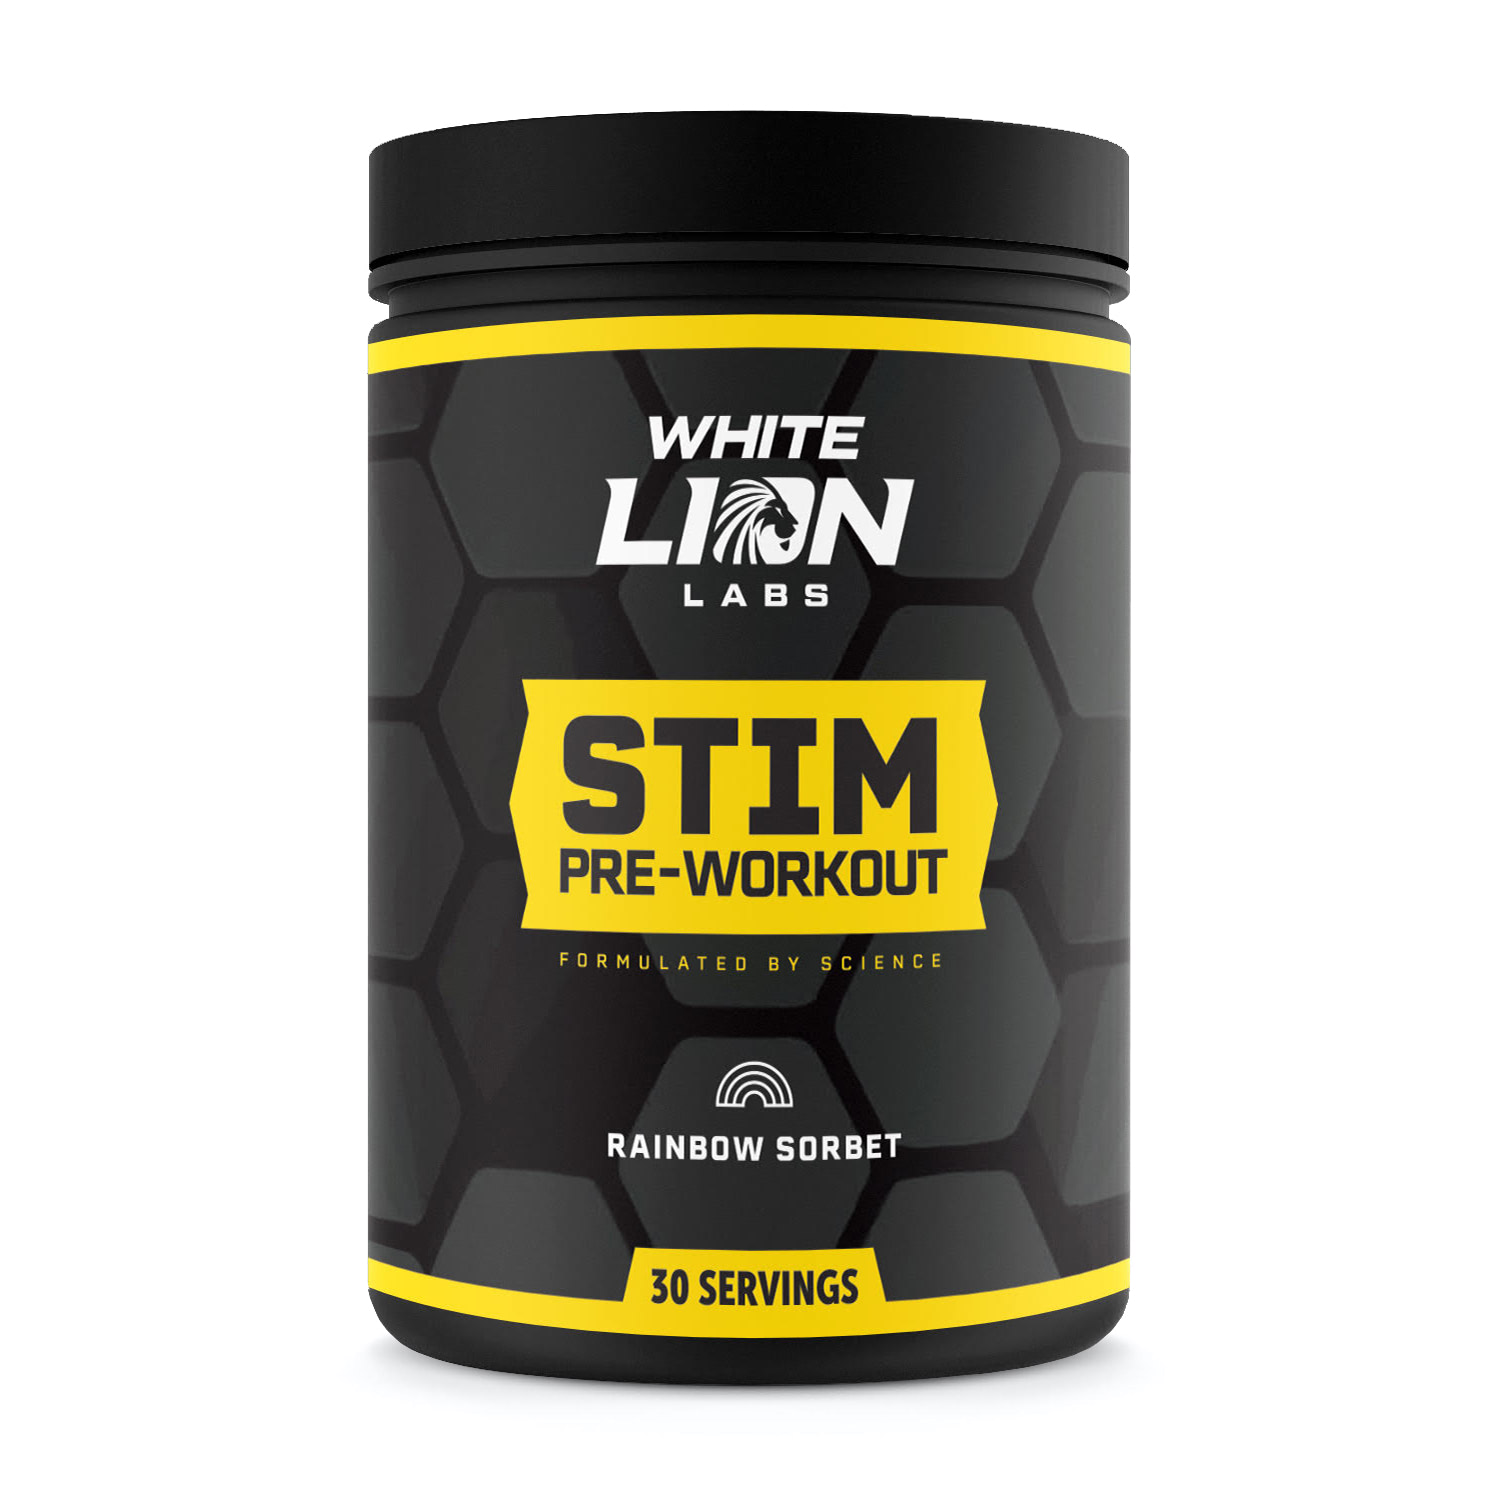 White Lion Labs STIM pre-workout packaging